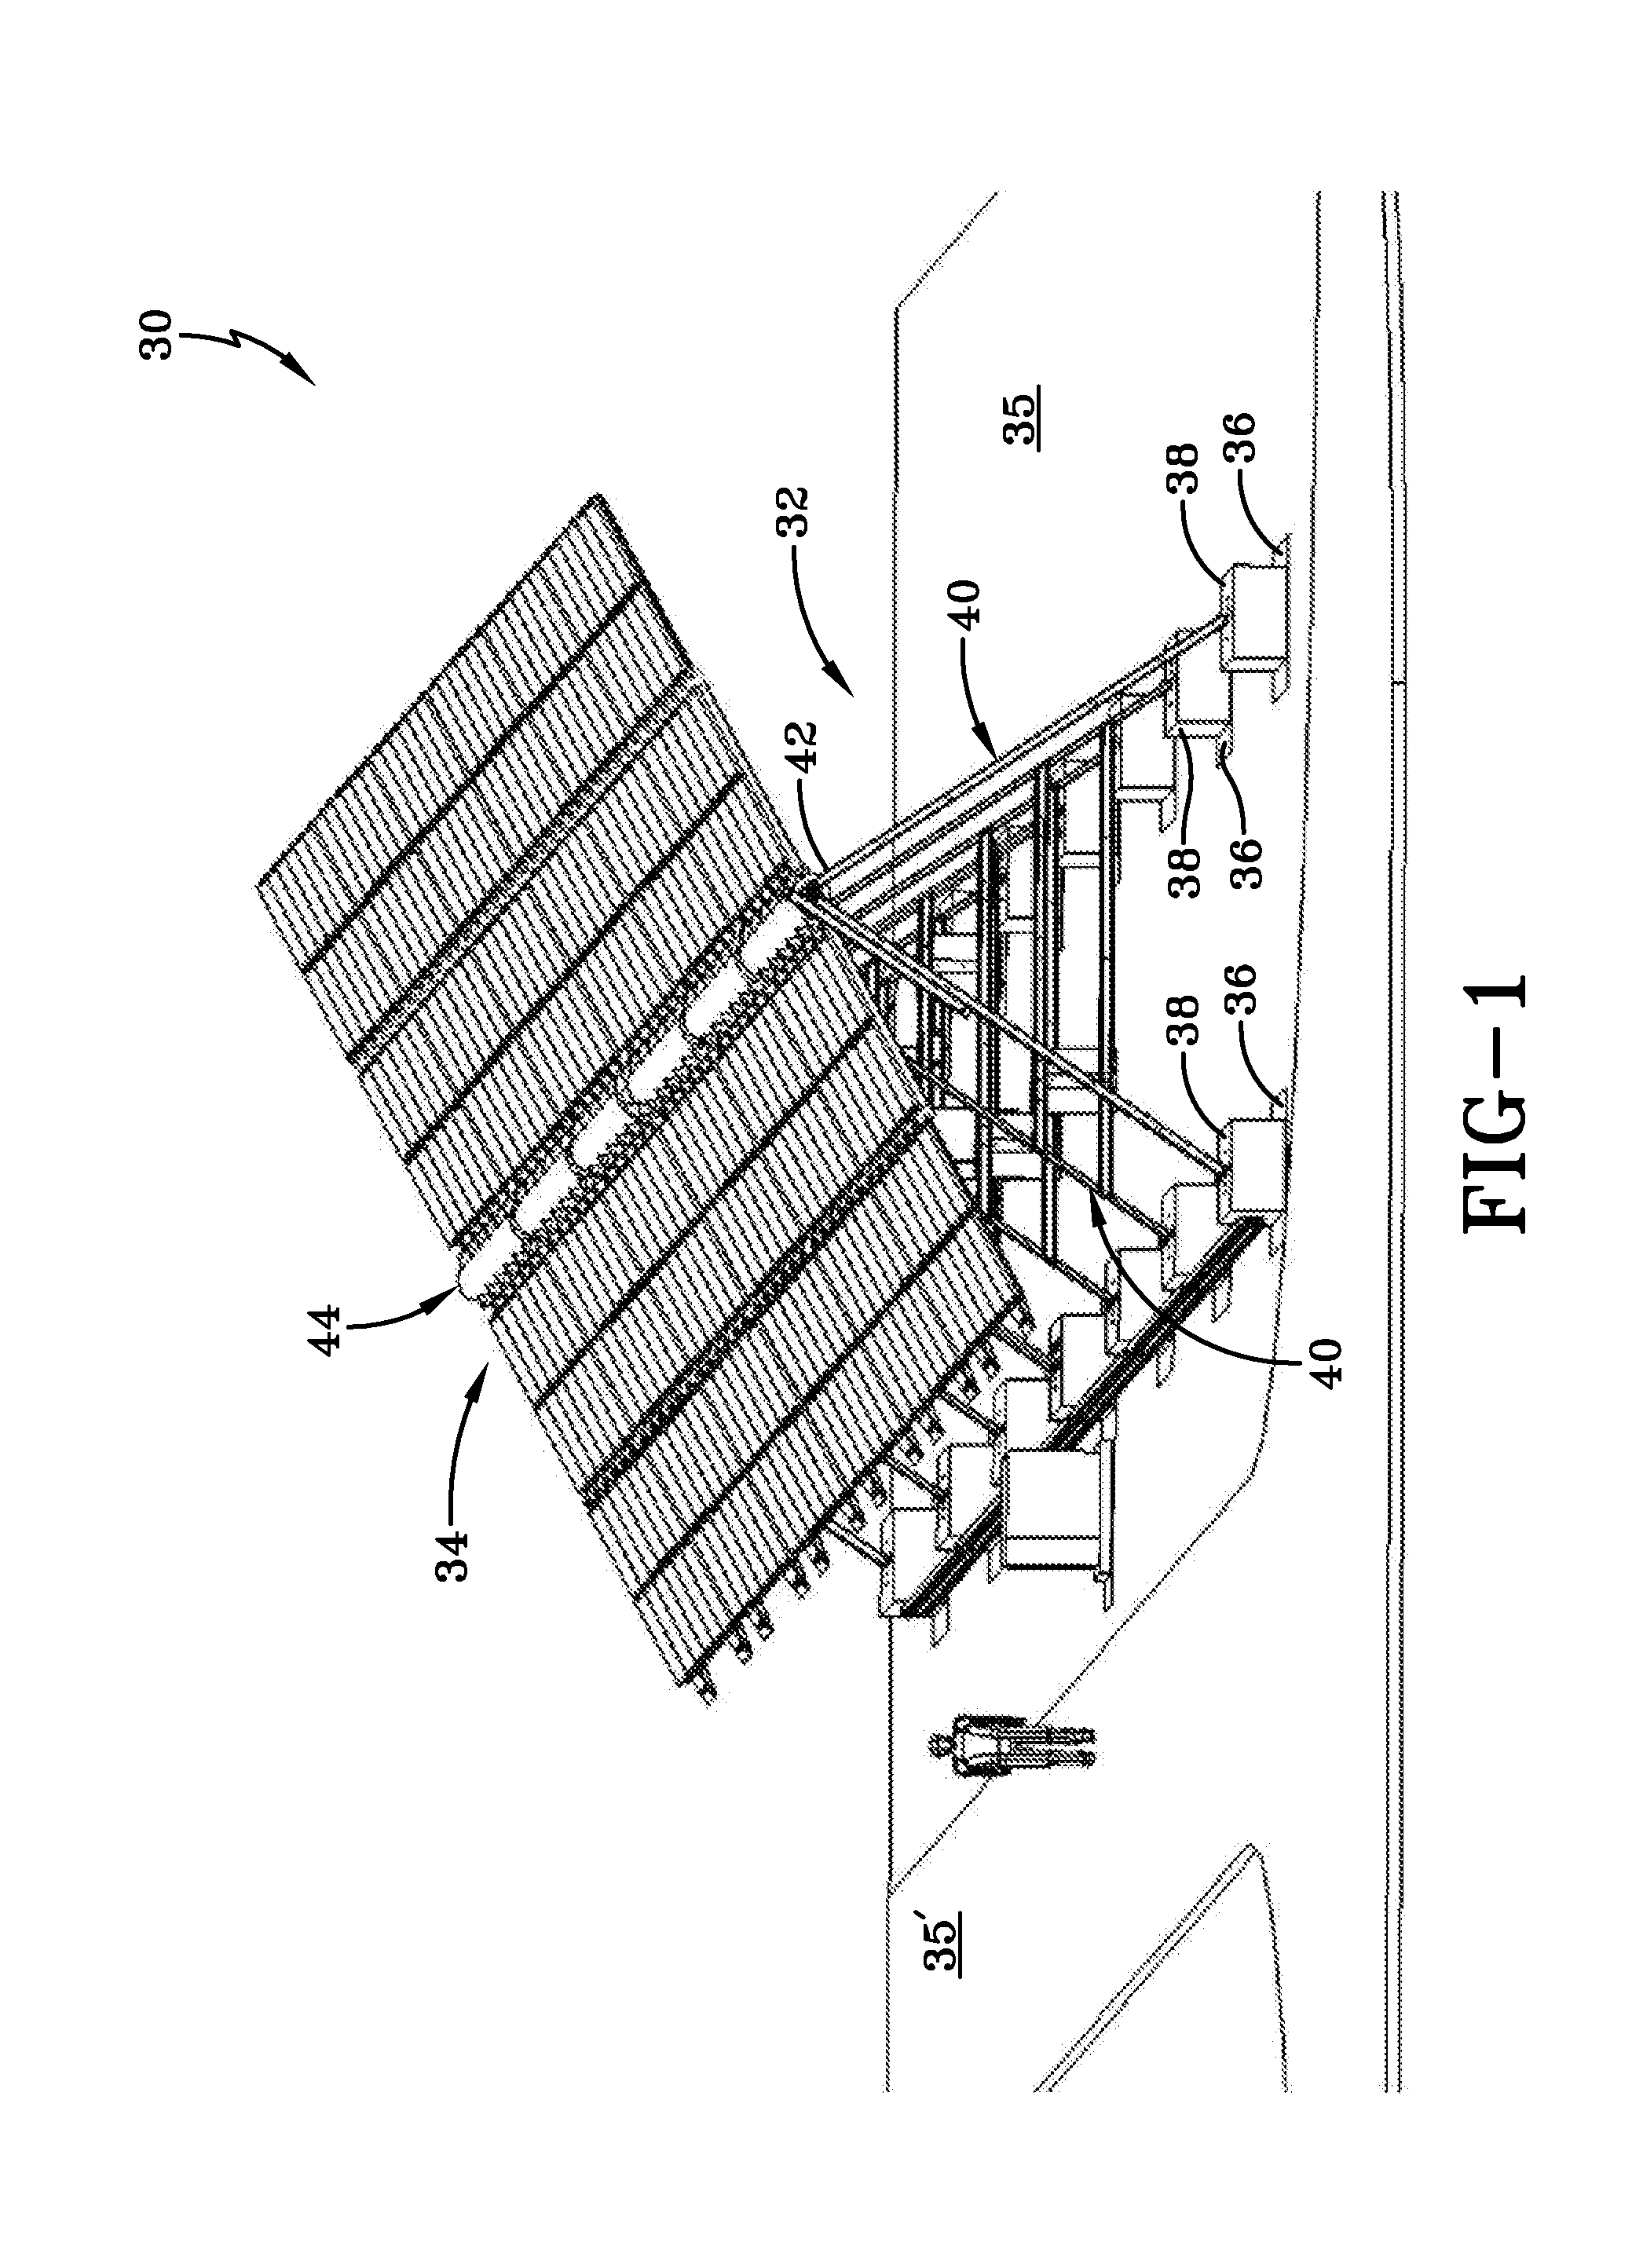 Foldable solar tracking system, assembly and method for assembly, shipping and installation of the same